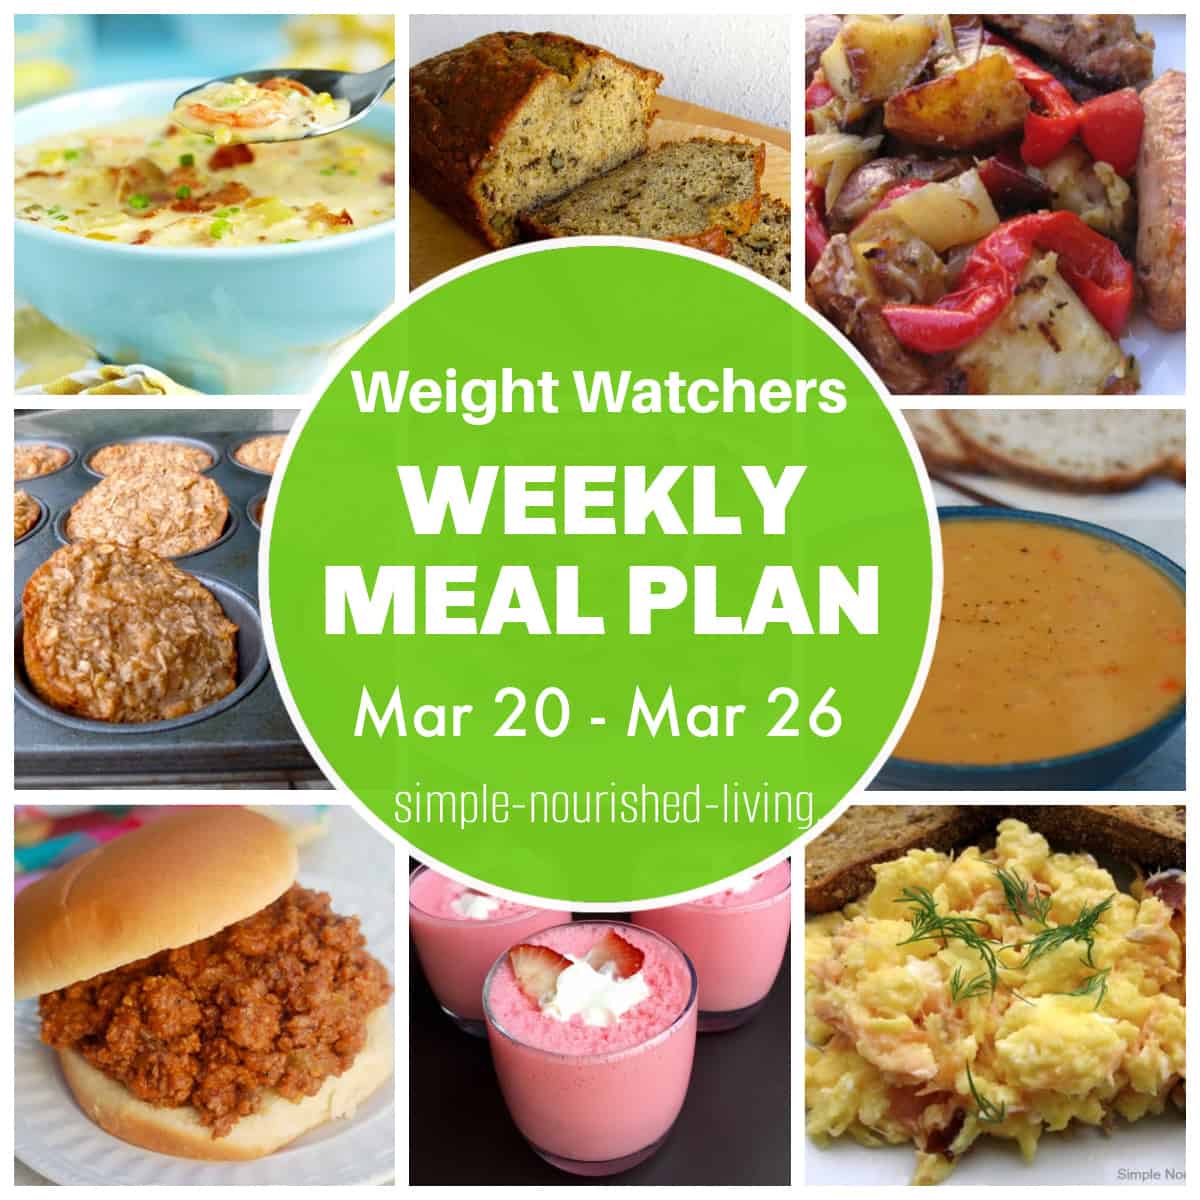 Food Collage: Shrimp Corn Chowder, Banana Bread, Sausage, Potatoes, Onions, Peppers, Banana Bread Oatmeal Cups, Pea Soup, Sloppy Joe, Jello Yogurt Fluff, Scrambled Eggs and Salmon with Round Green Text Box: Weight Watchers Weekly Meal Plan Mar 20 - Mar 26